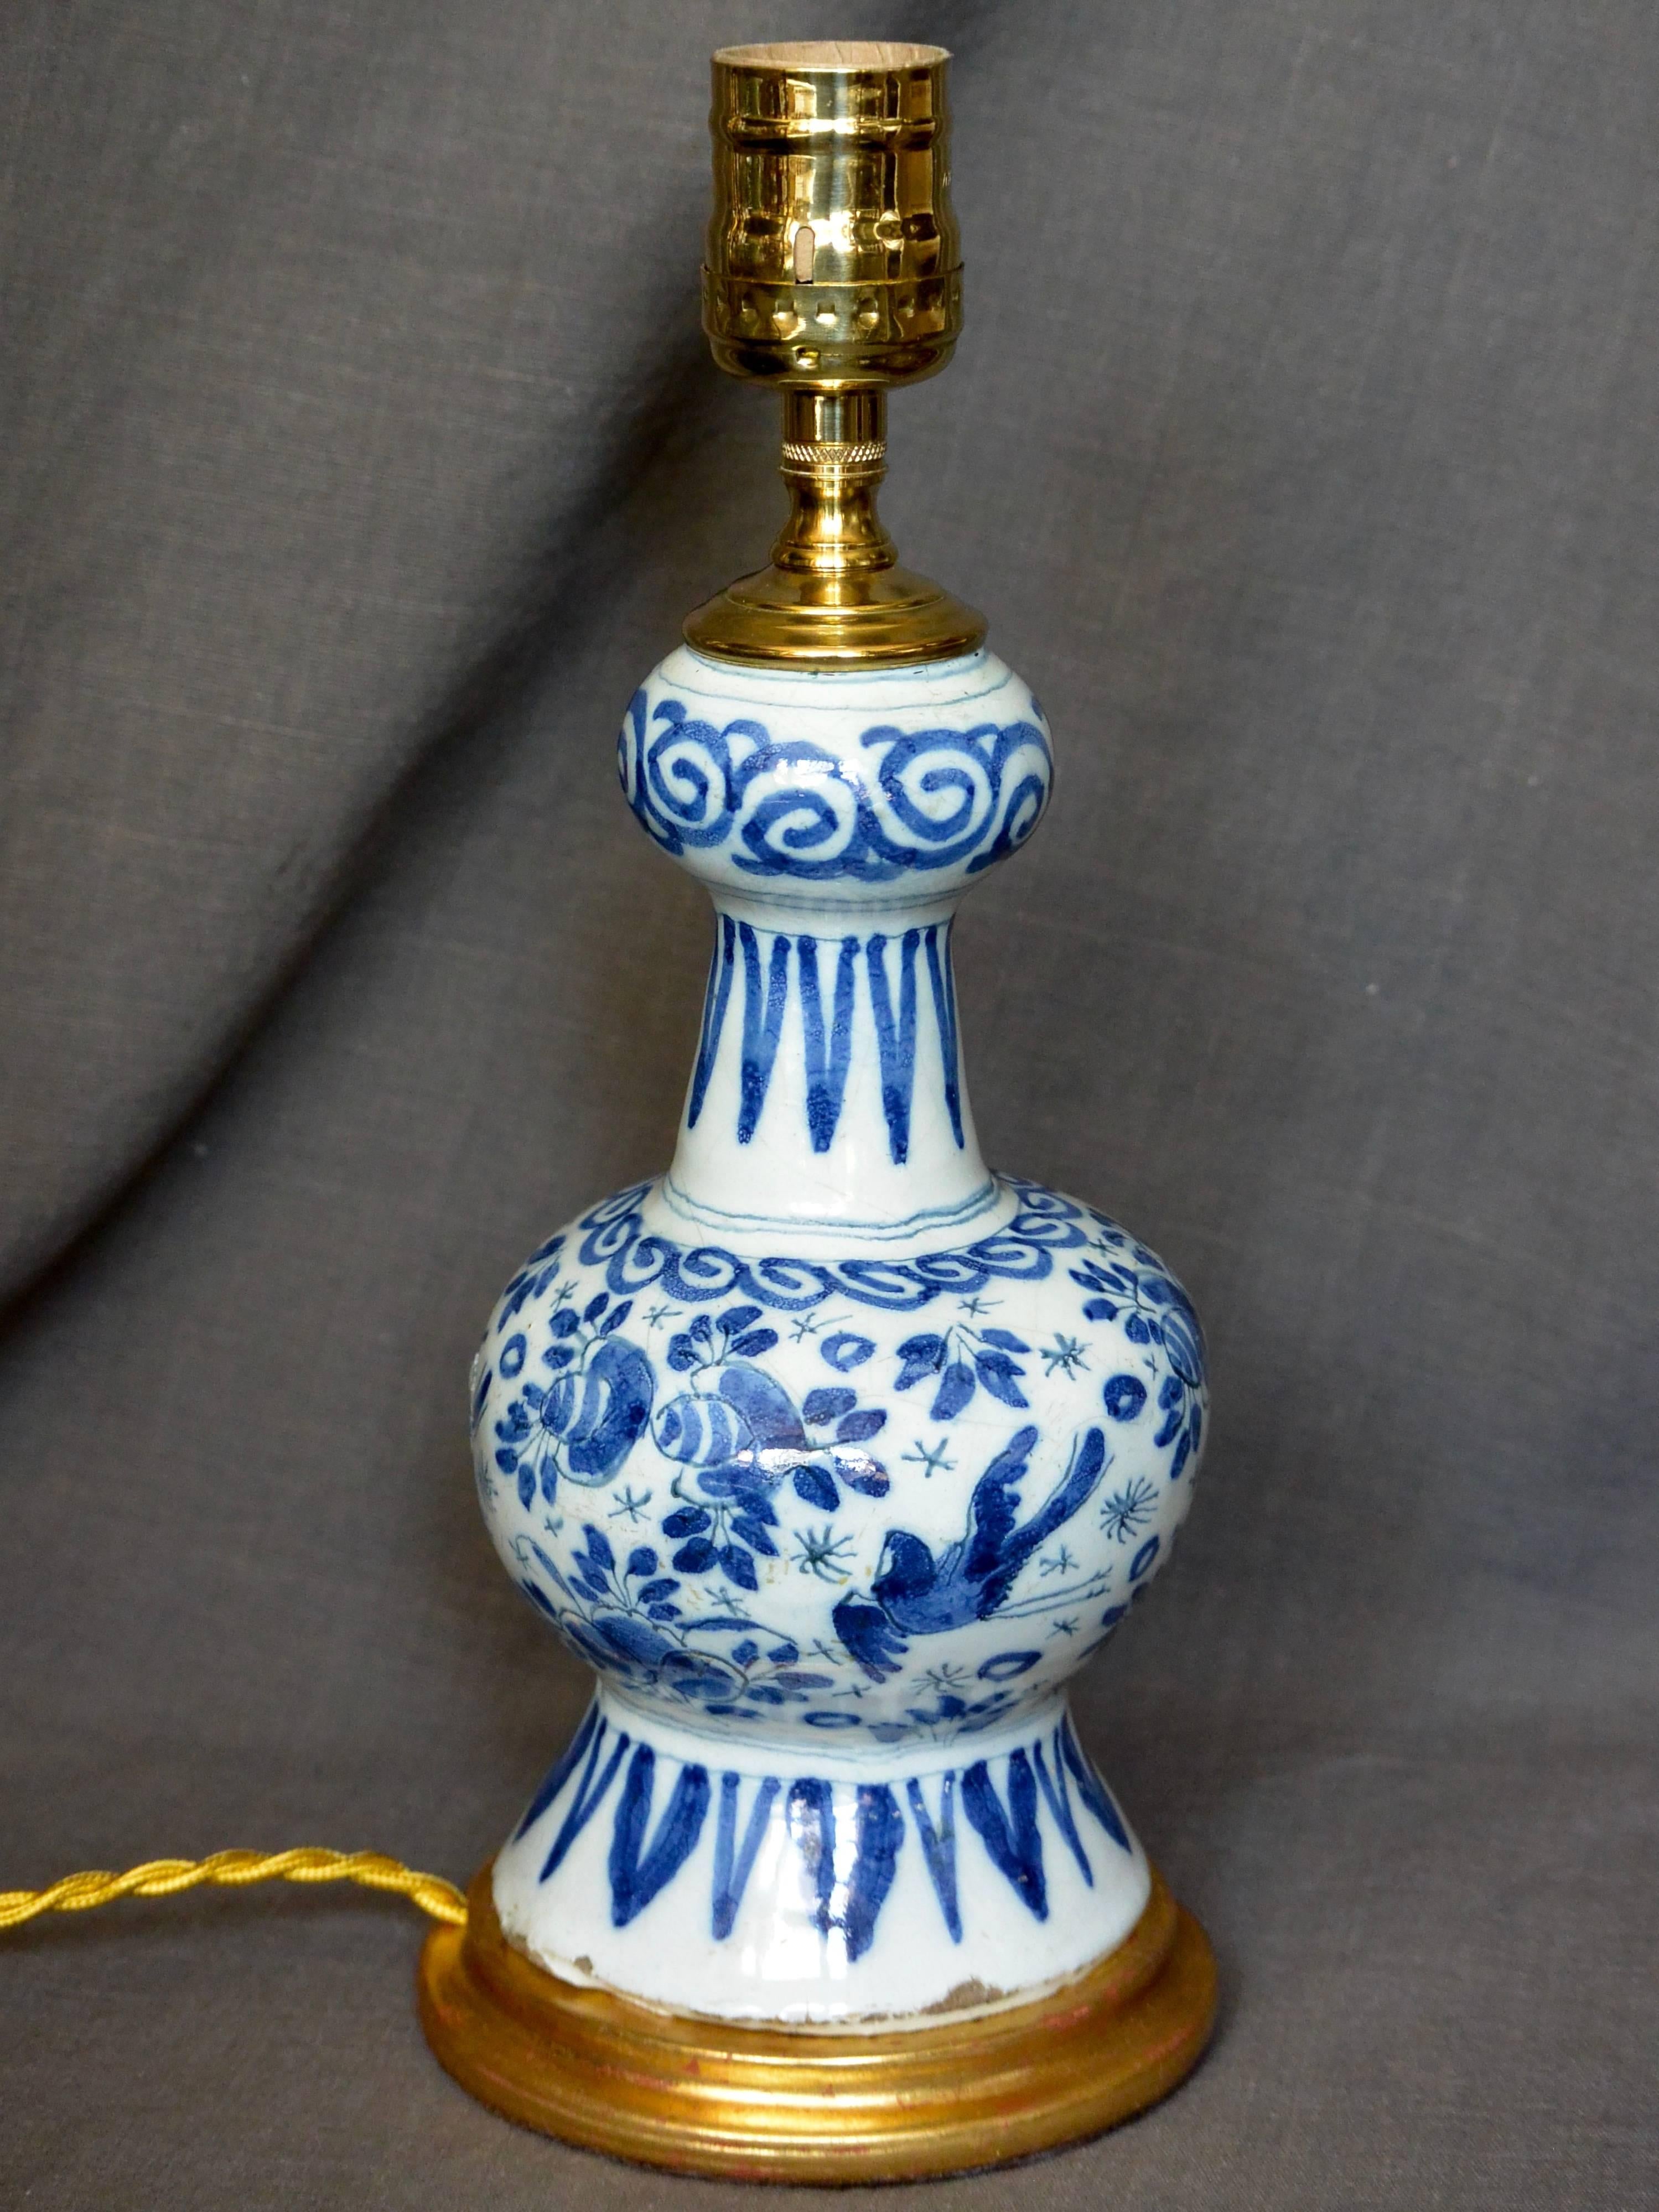 Dutch Delft blue and white vase lamp on water-gilt base. Small blue and white Dutch Delft faience vase of baluster form with delicate floral decoration, birds and borders mounted as a lamp on water-gilt base with gold silk cord and switch.